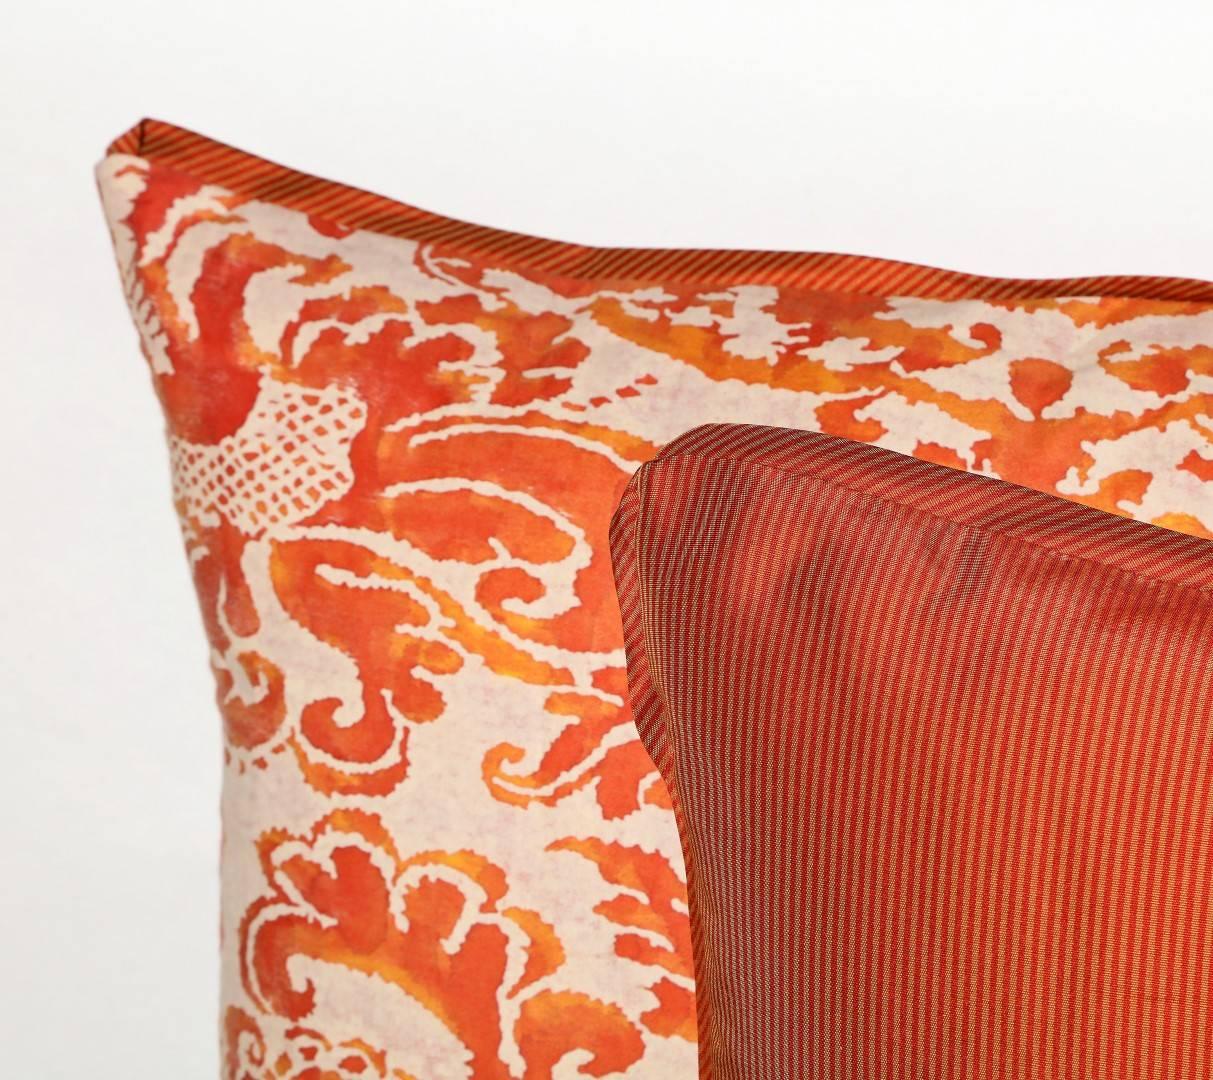 Contemporary Pair of Fortuny Fabric Cushions in the Corone Pattern